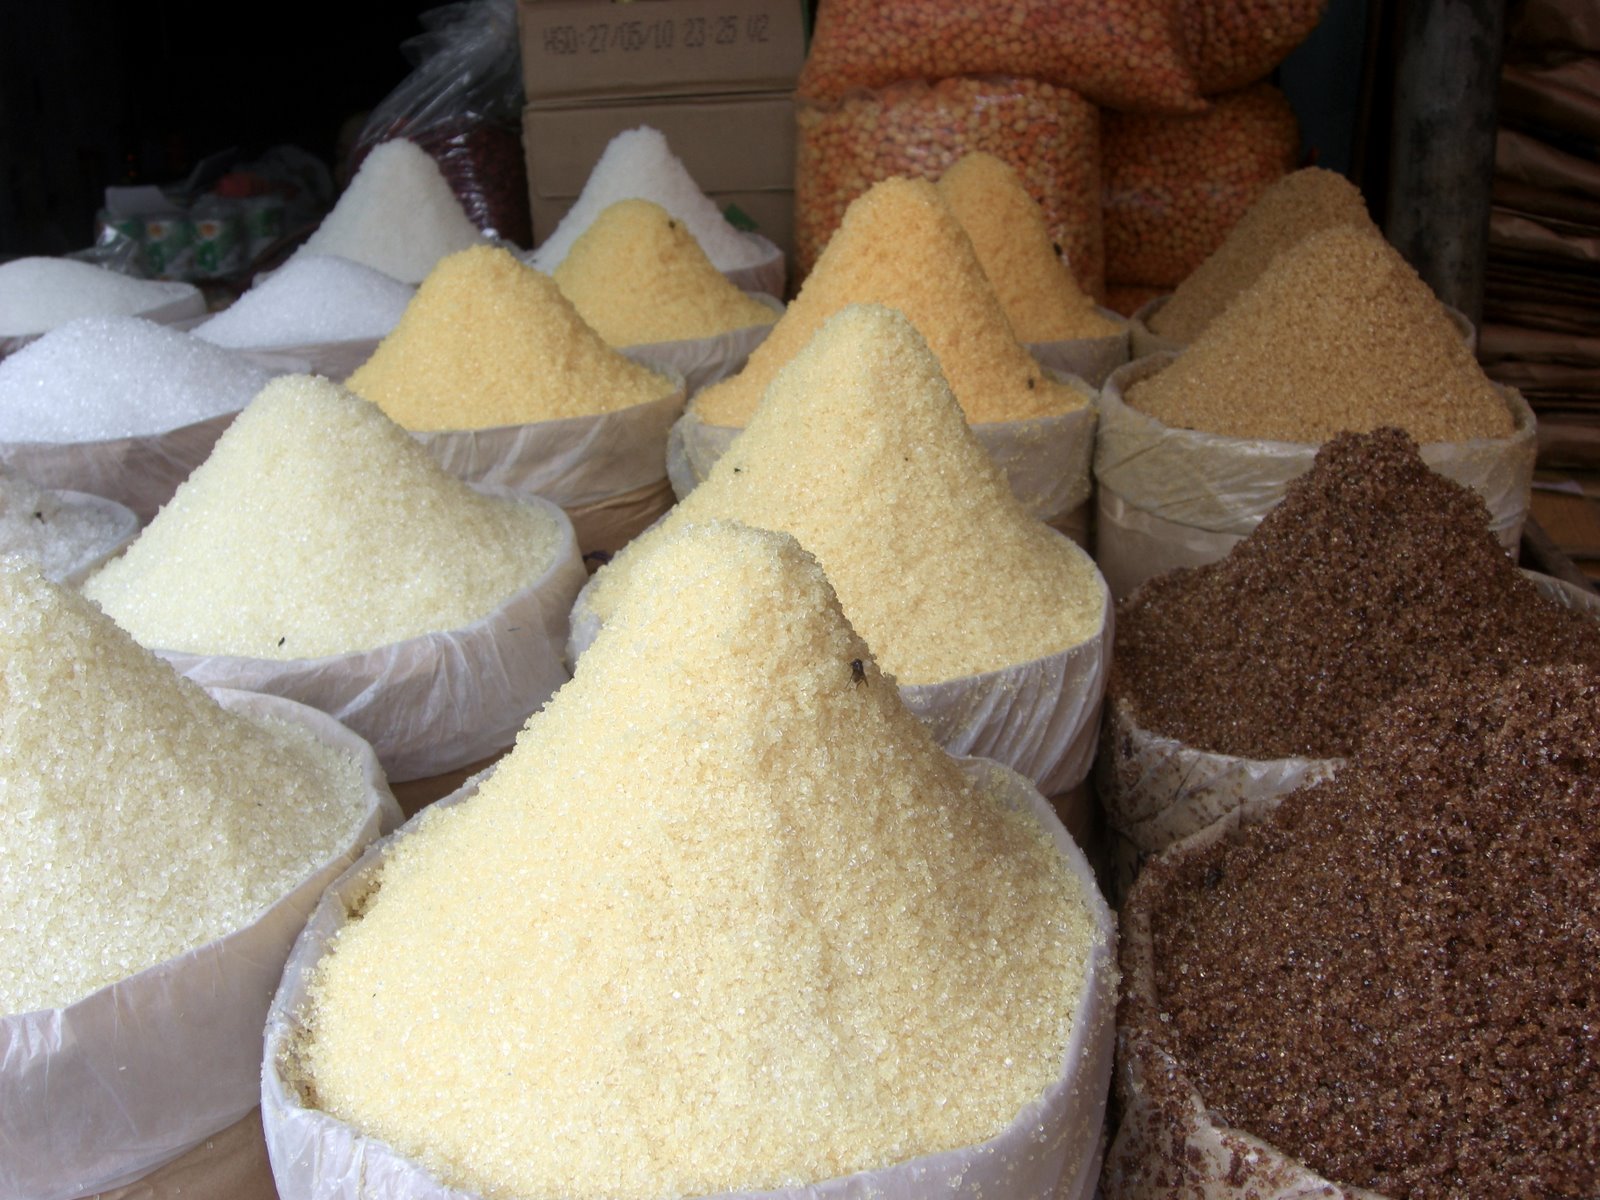 There will be no rice shortage during festive season, Minister assures